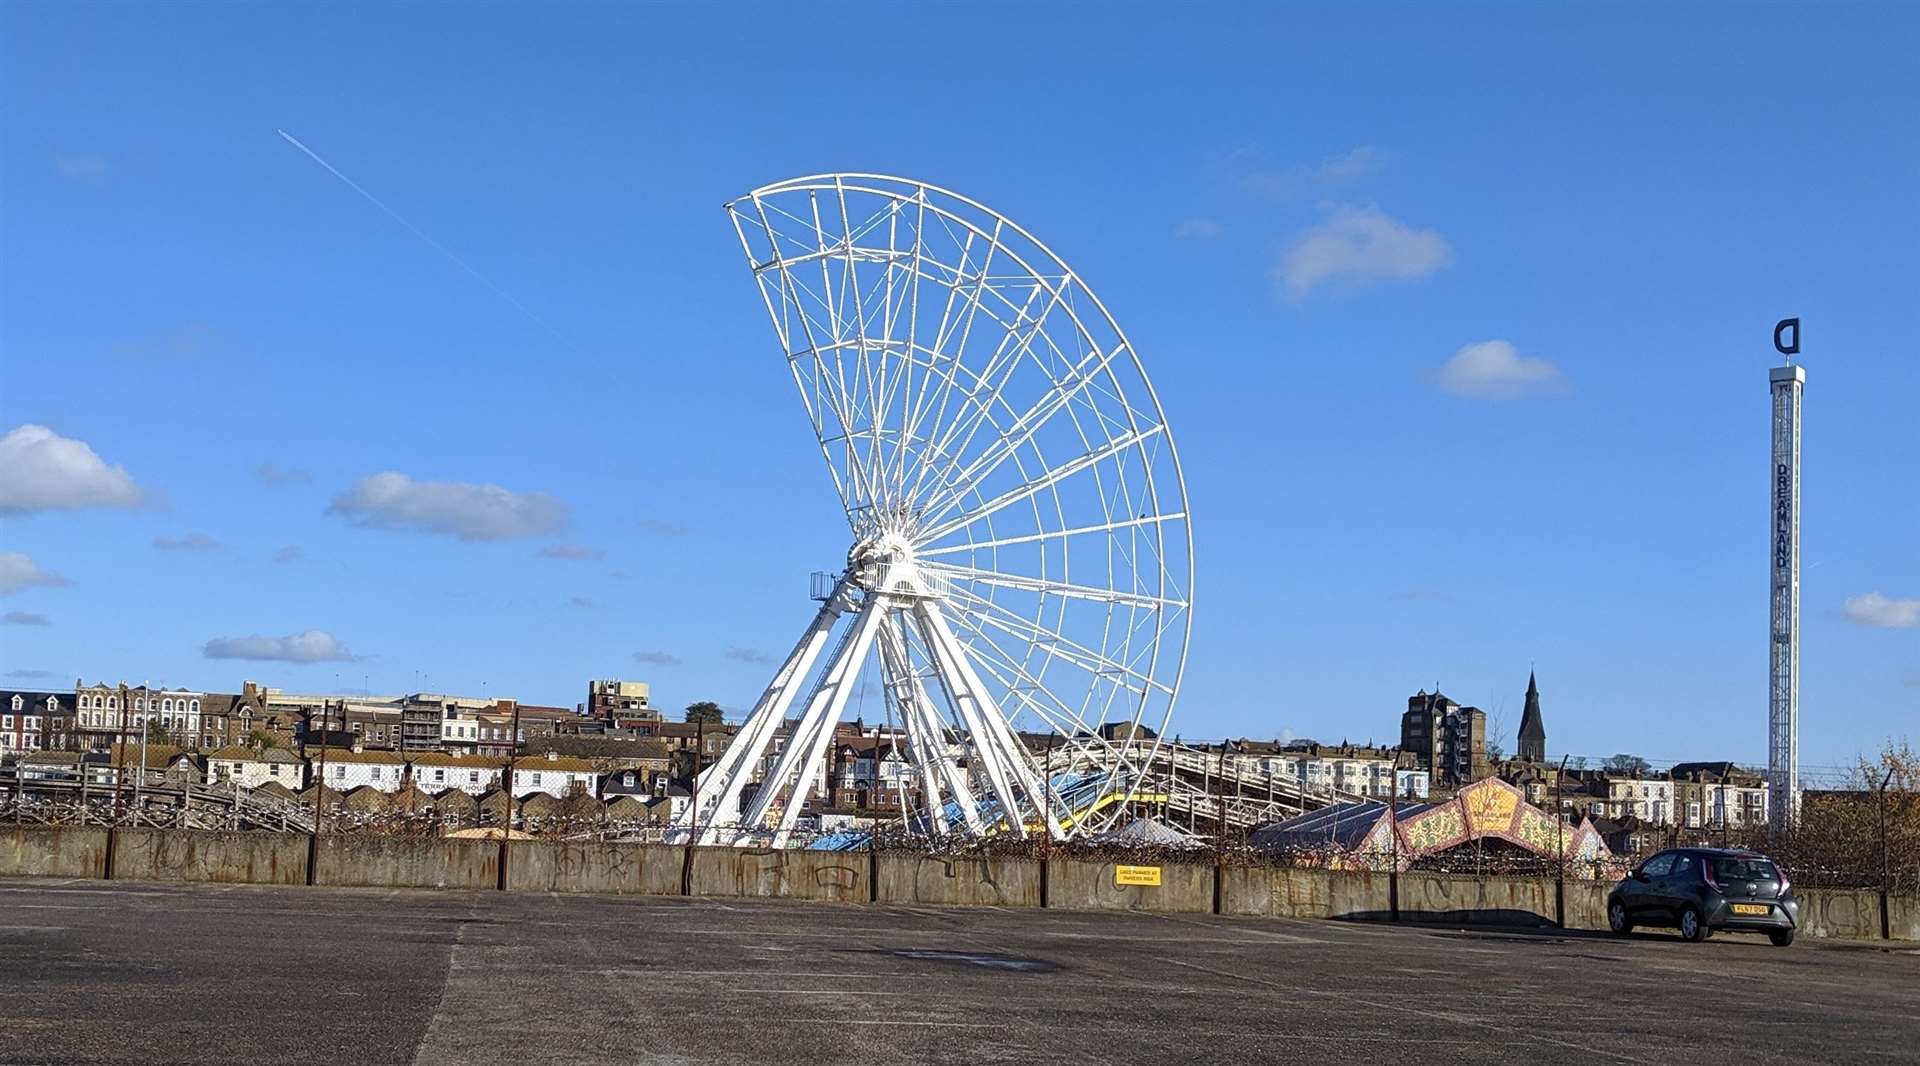 Dreamland's Big Wheel is being dismantled. Picture: Rob Yates